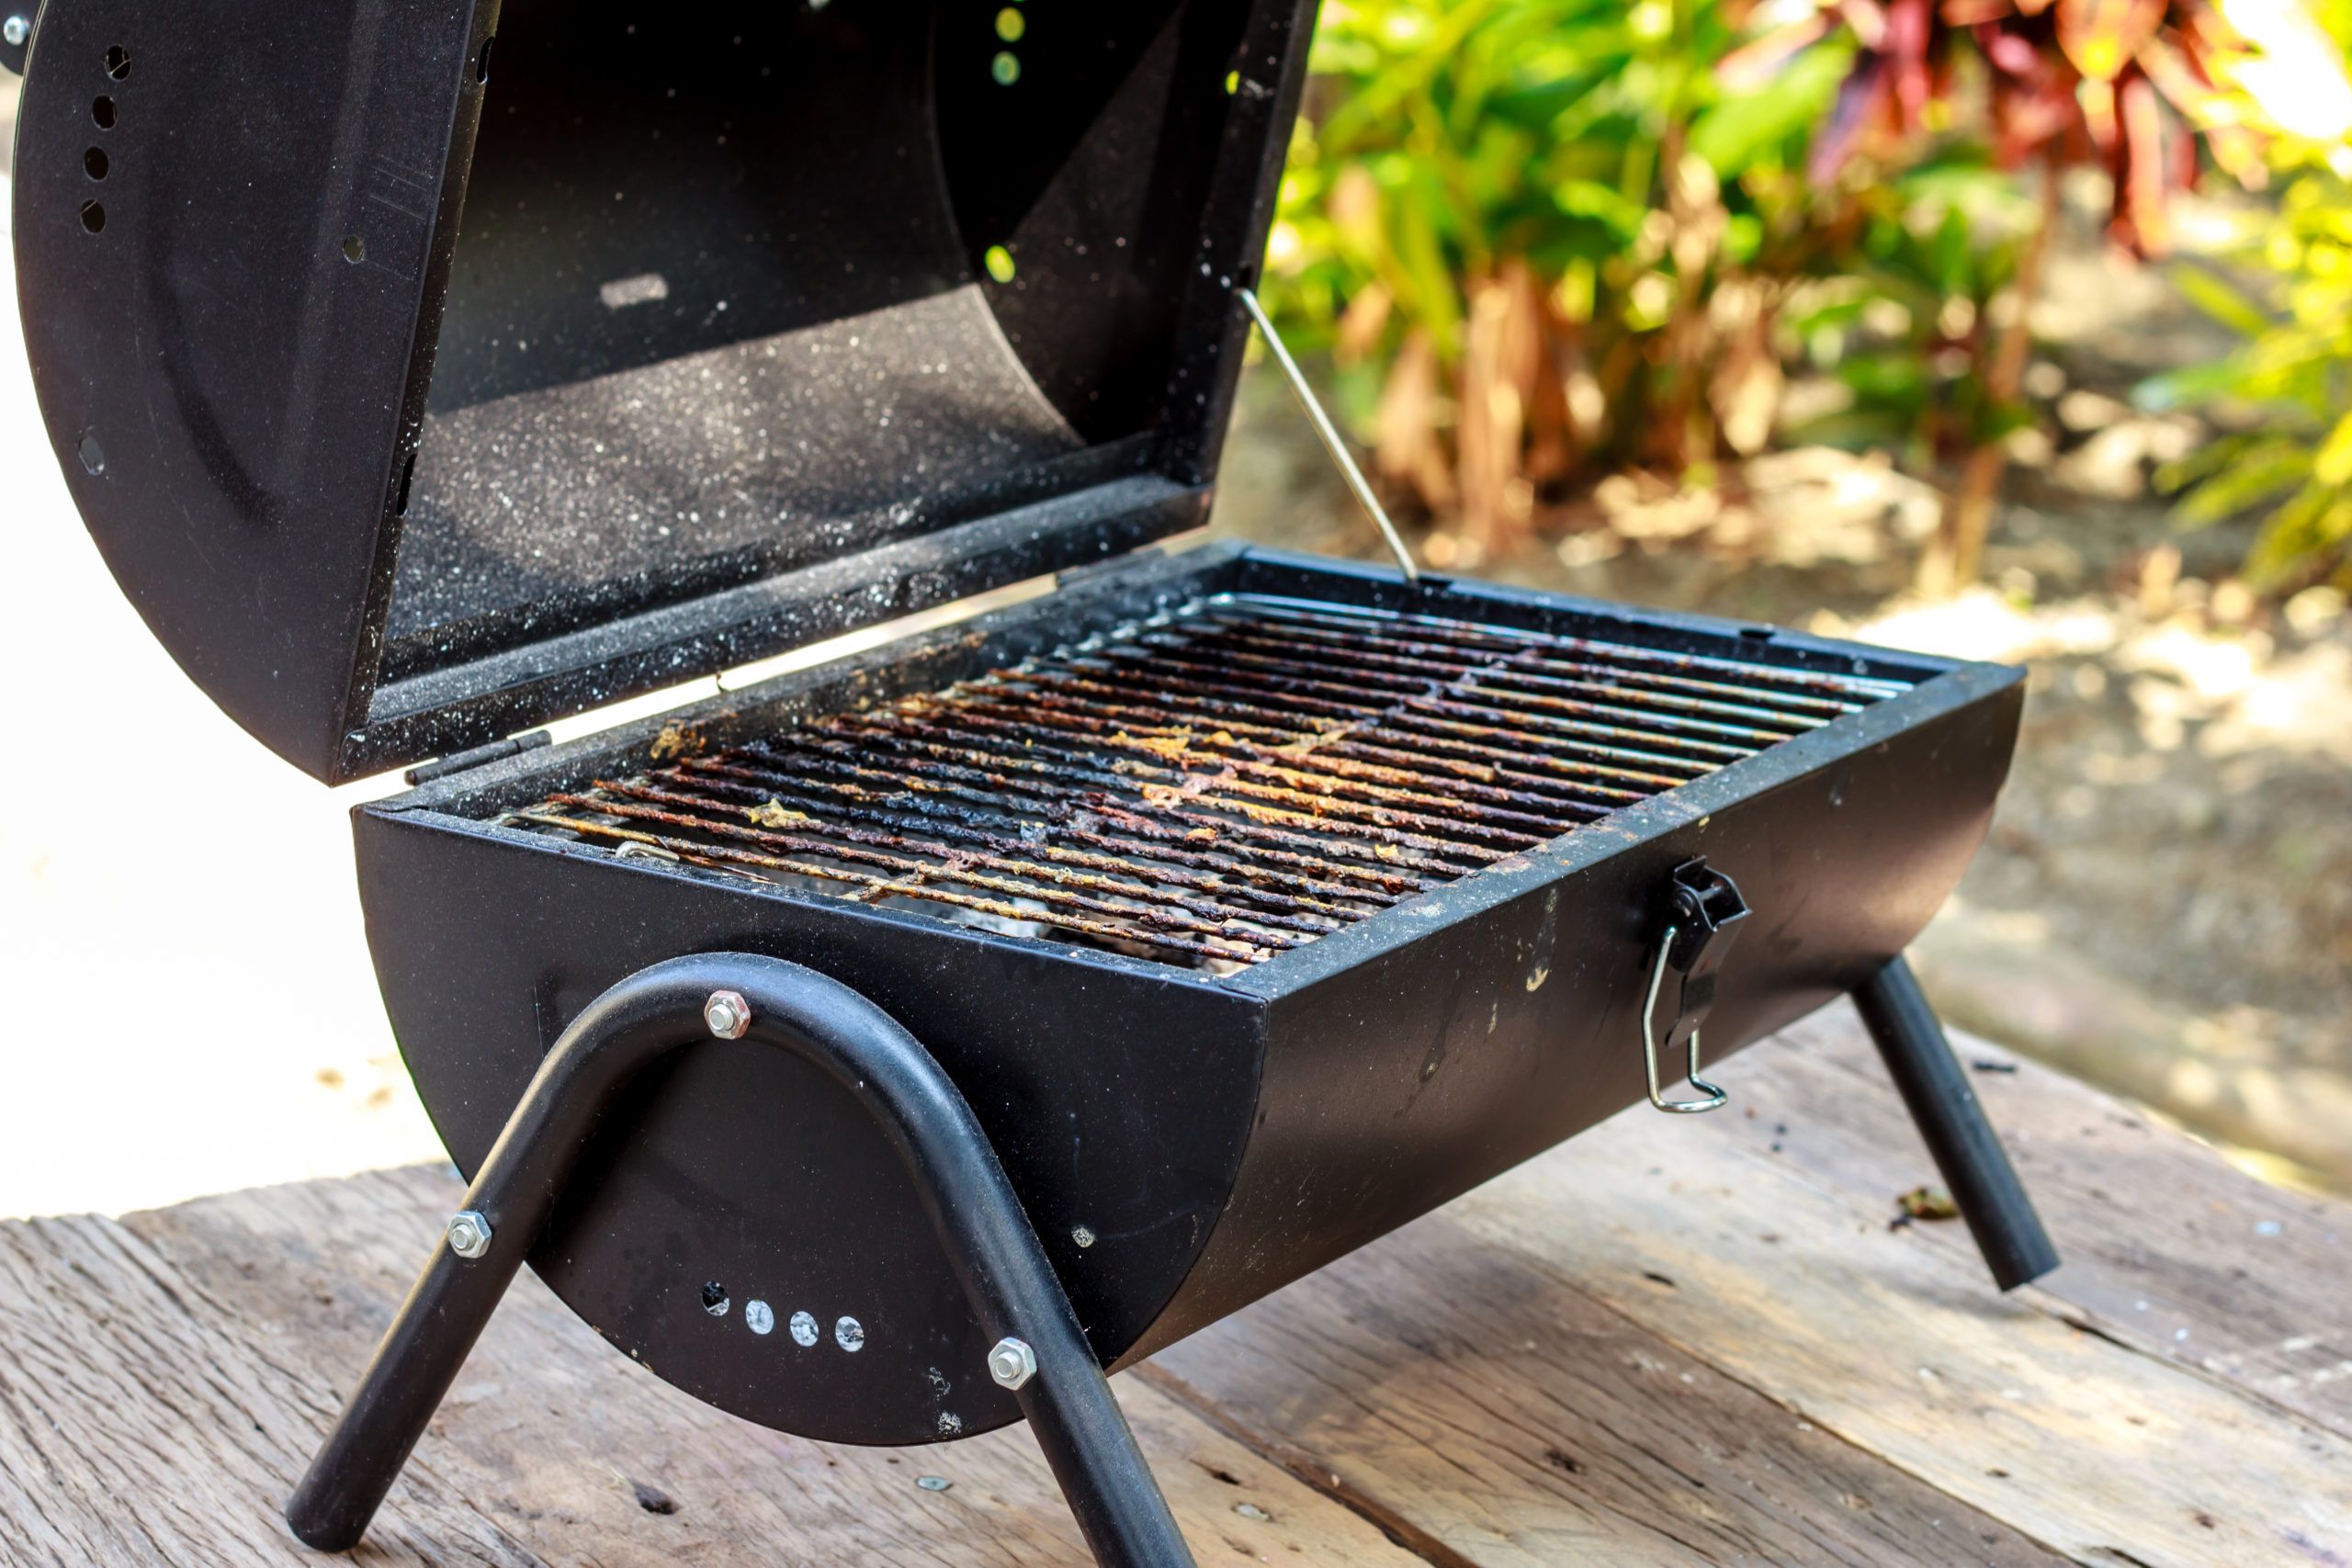 The,Portable,Barbecue,On,The,Wooden,Table